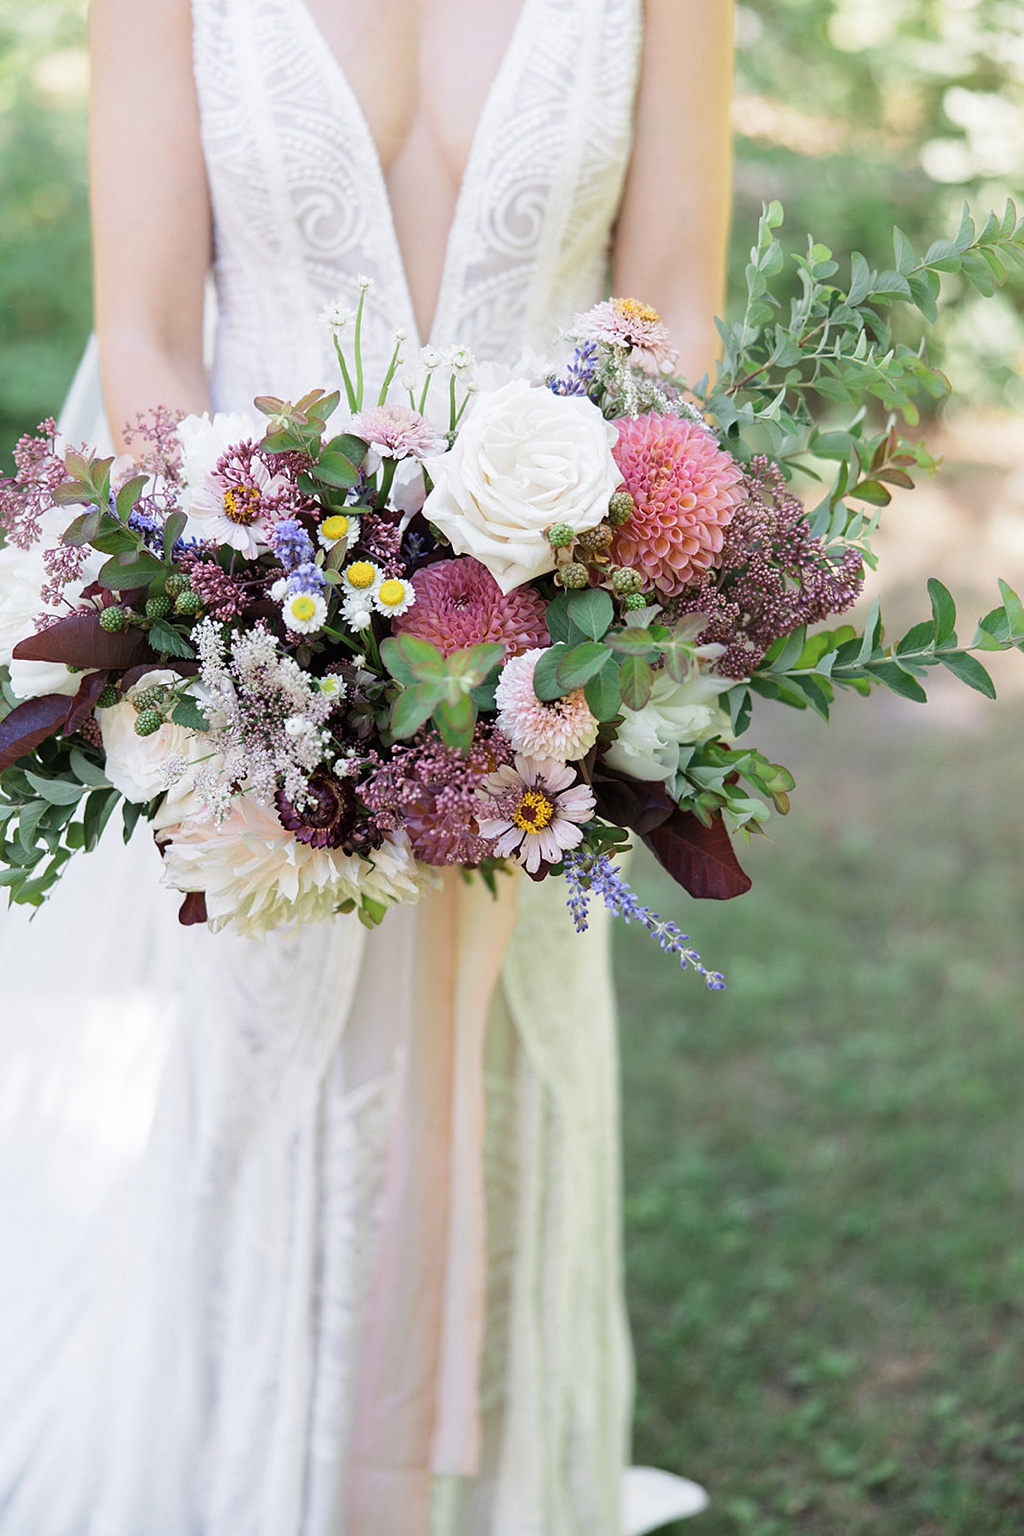 The bridal bouquet at this Tierra Retreat Center wedding uses seasonally inspired flowers in blush, pink, and purple tones